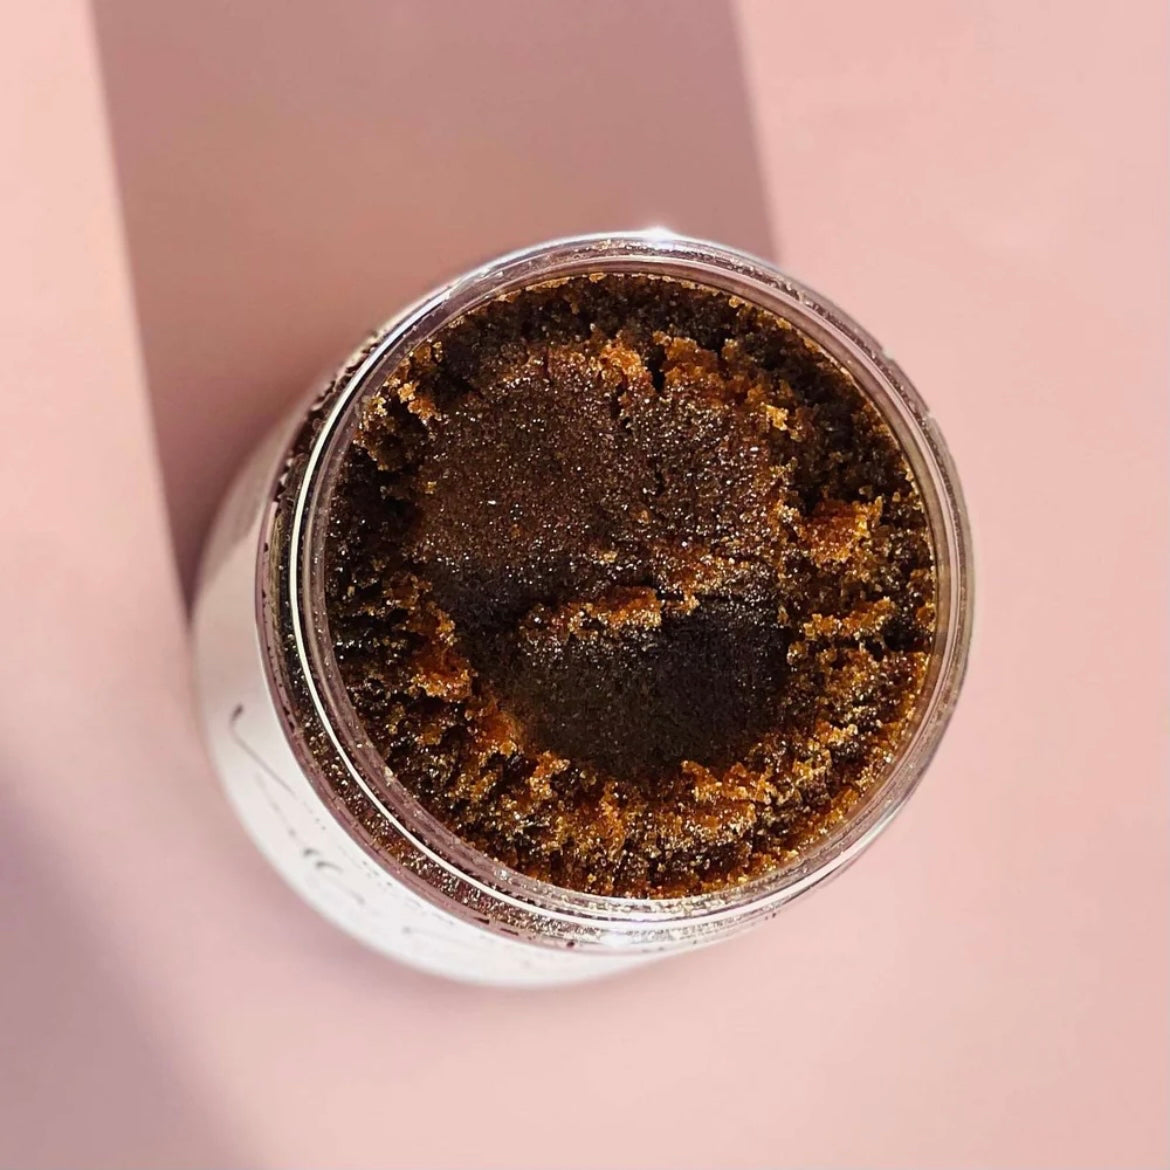 Body Scrub by Glam Body: 
Our Body Scrubs are not the fragile type, they really scrub off all your dead, dry, itchy skin cells leaving your skin feeling so soft, fresh, hydrated &amp; rejuve - Ciao Bella Dresses 